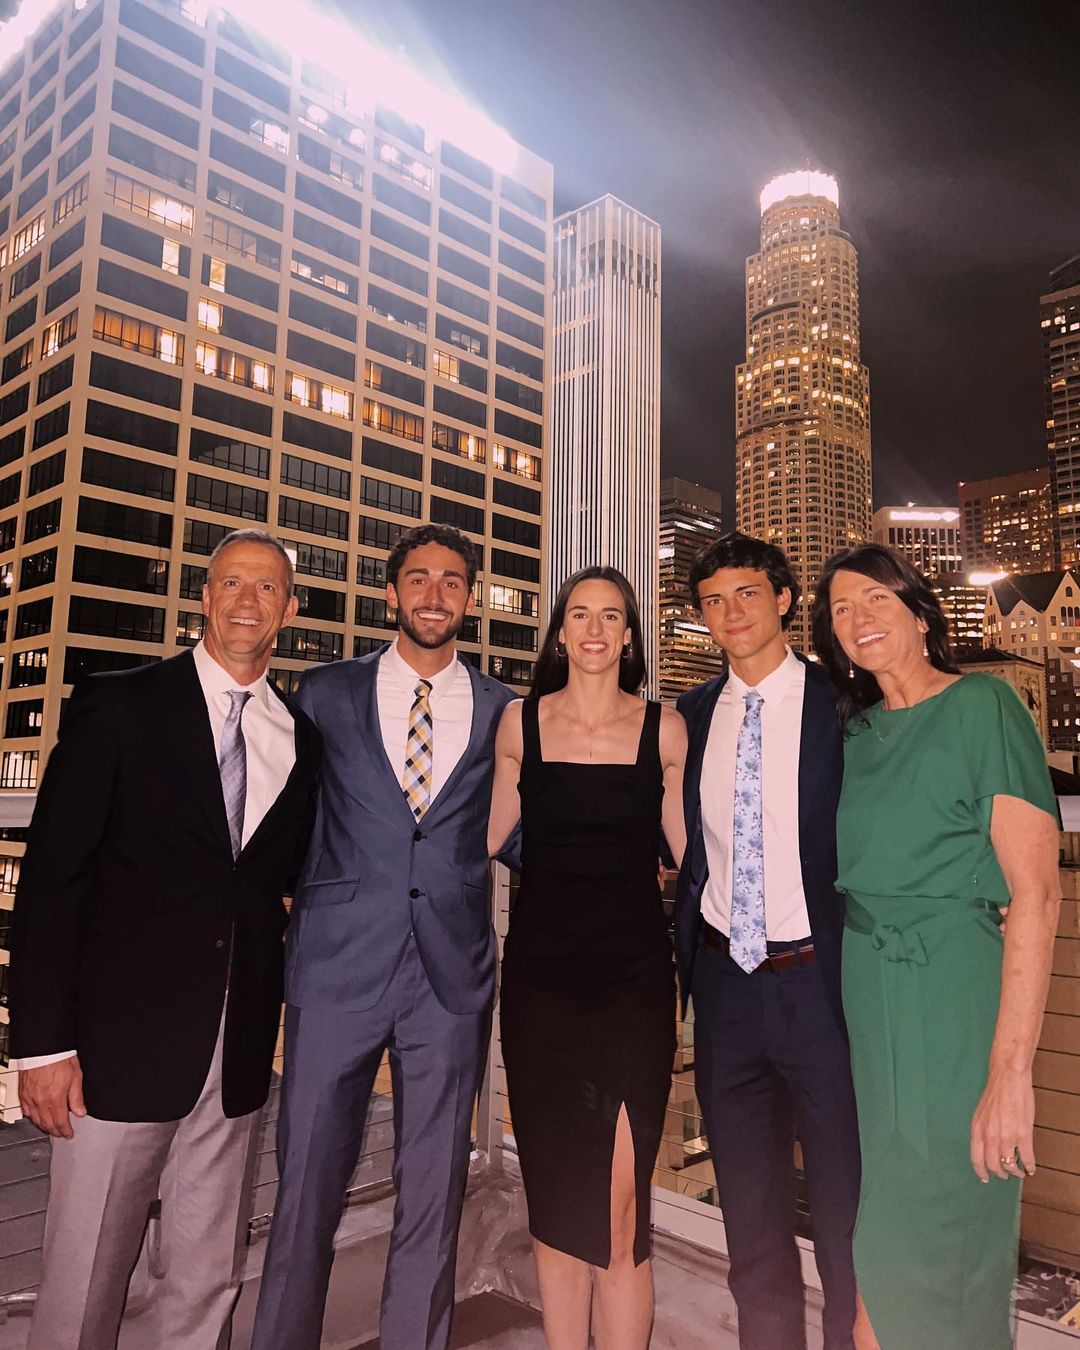 Brent, Blake, Colin, Caitlin, and Anne Clark from an Instagram post dated May 10, 2023. | Source: Instagram/caitlinclark22/